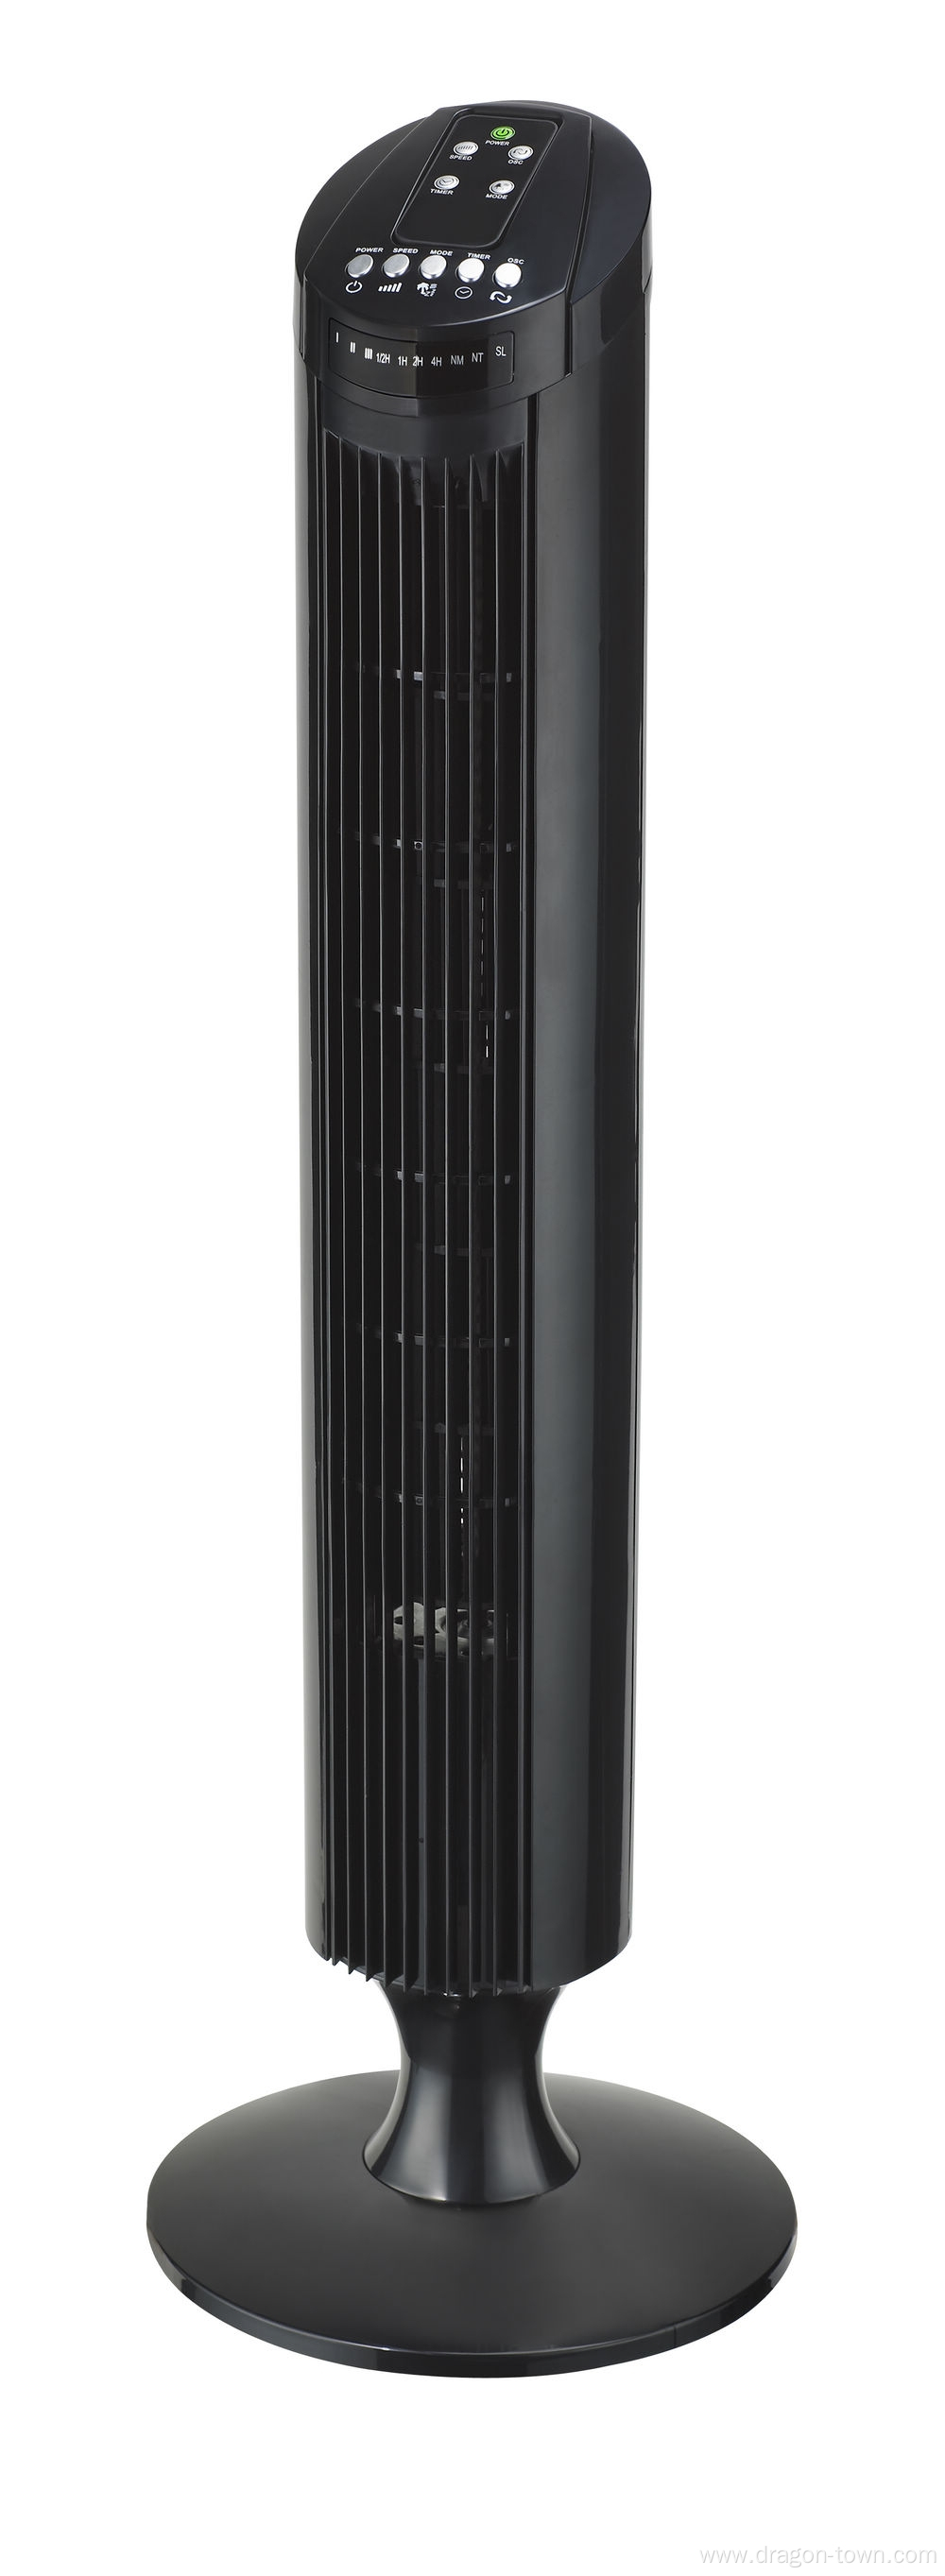 33 inch Vertical Tower fan for office